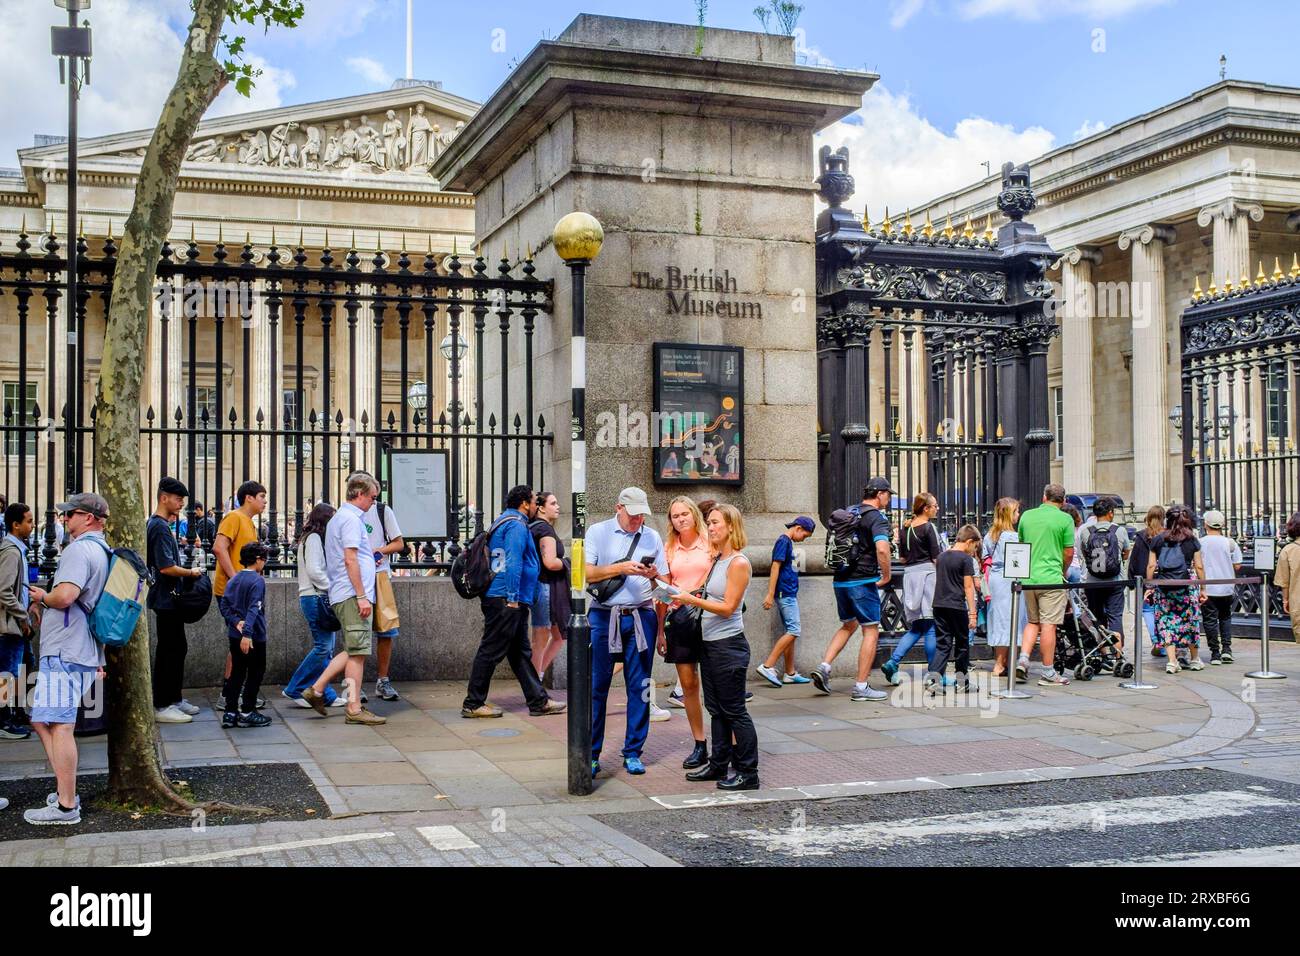 Visitors to the British Museum queue outside for entry to the museum, London, UK. Stock Photo